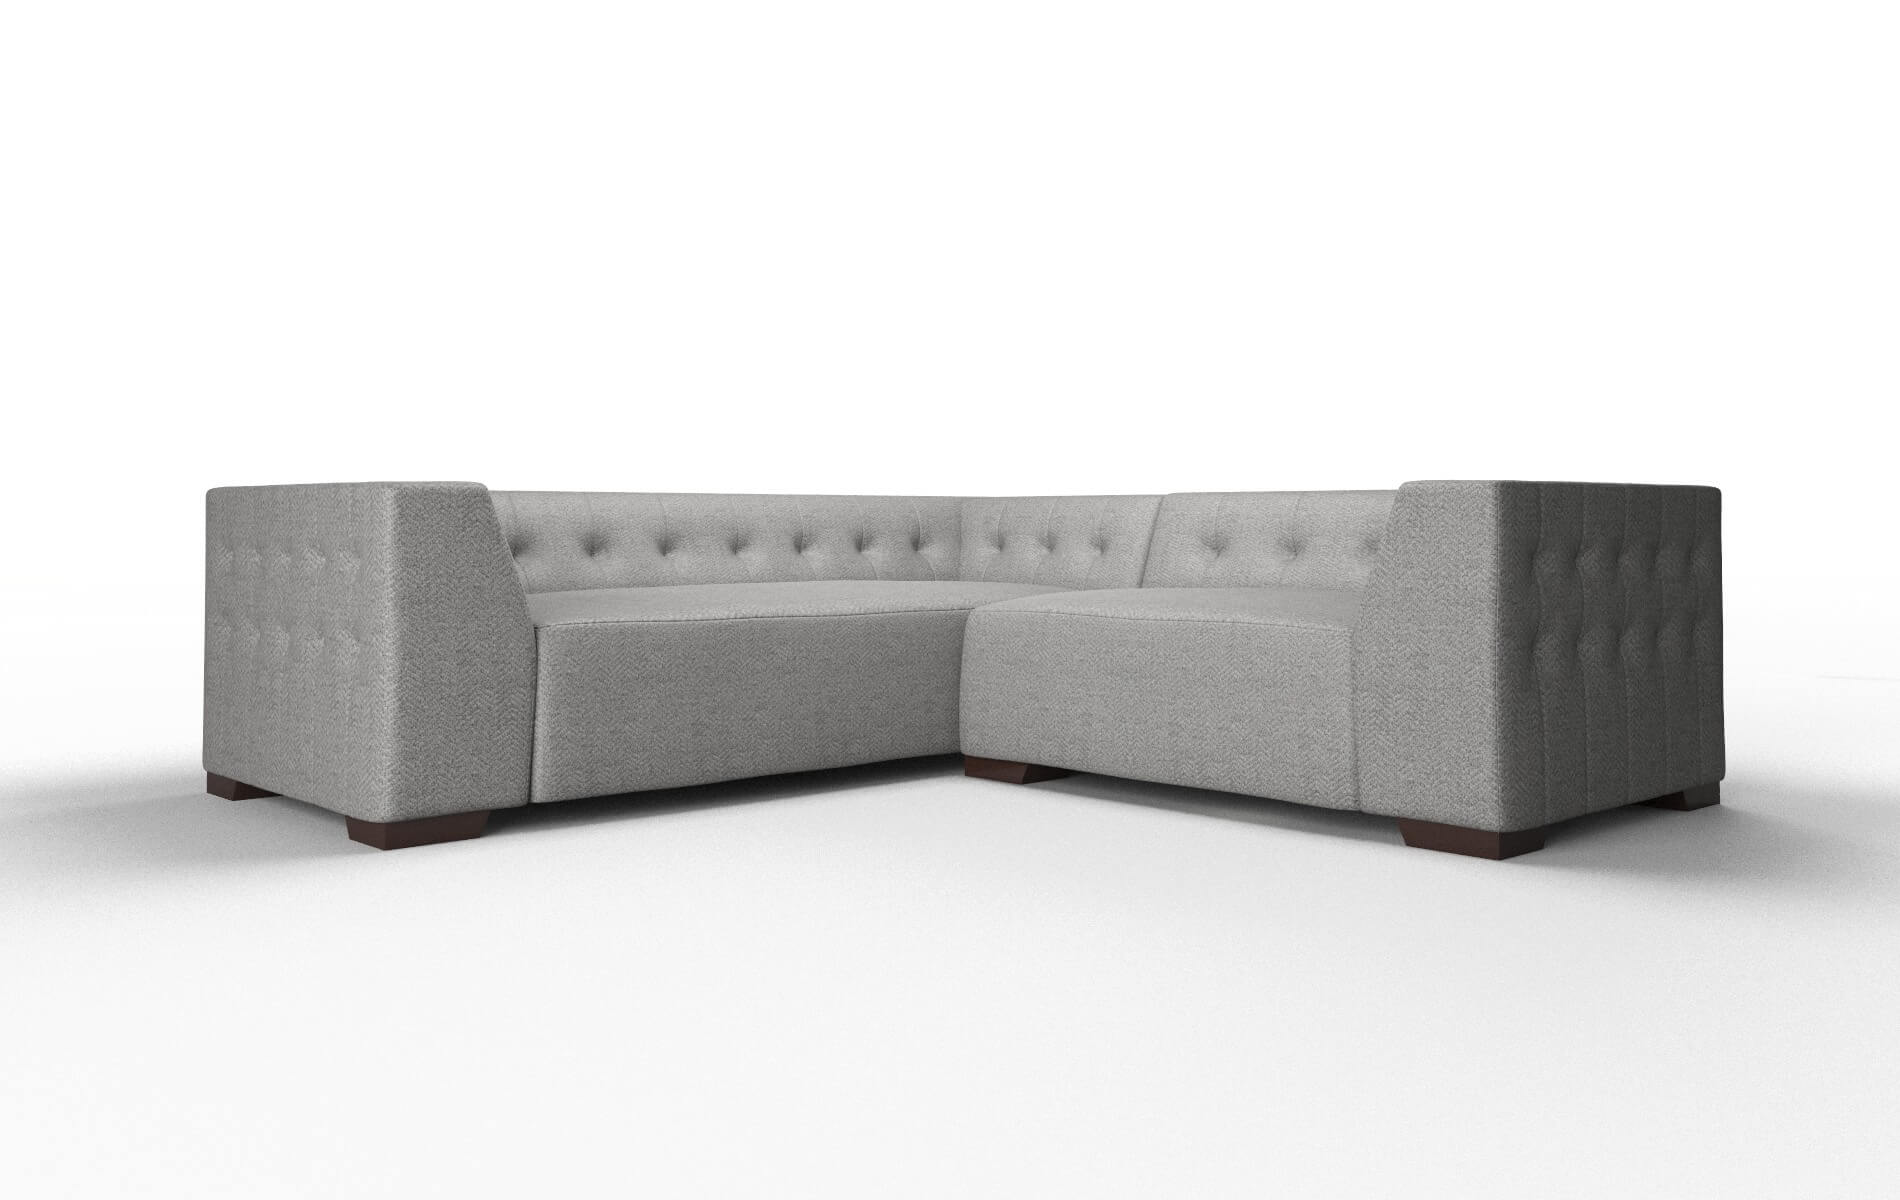 Palermo Catalina Steel Sectional espresso legs